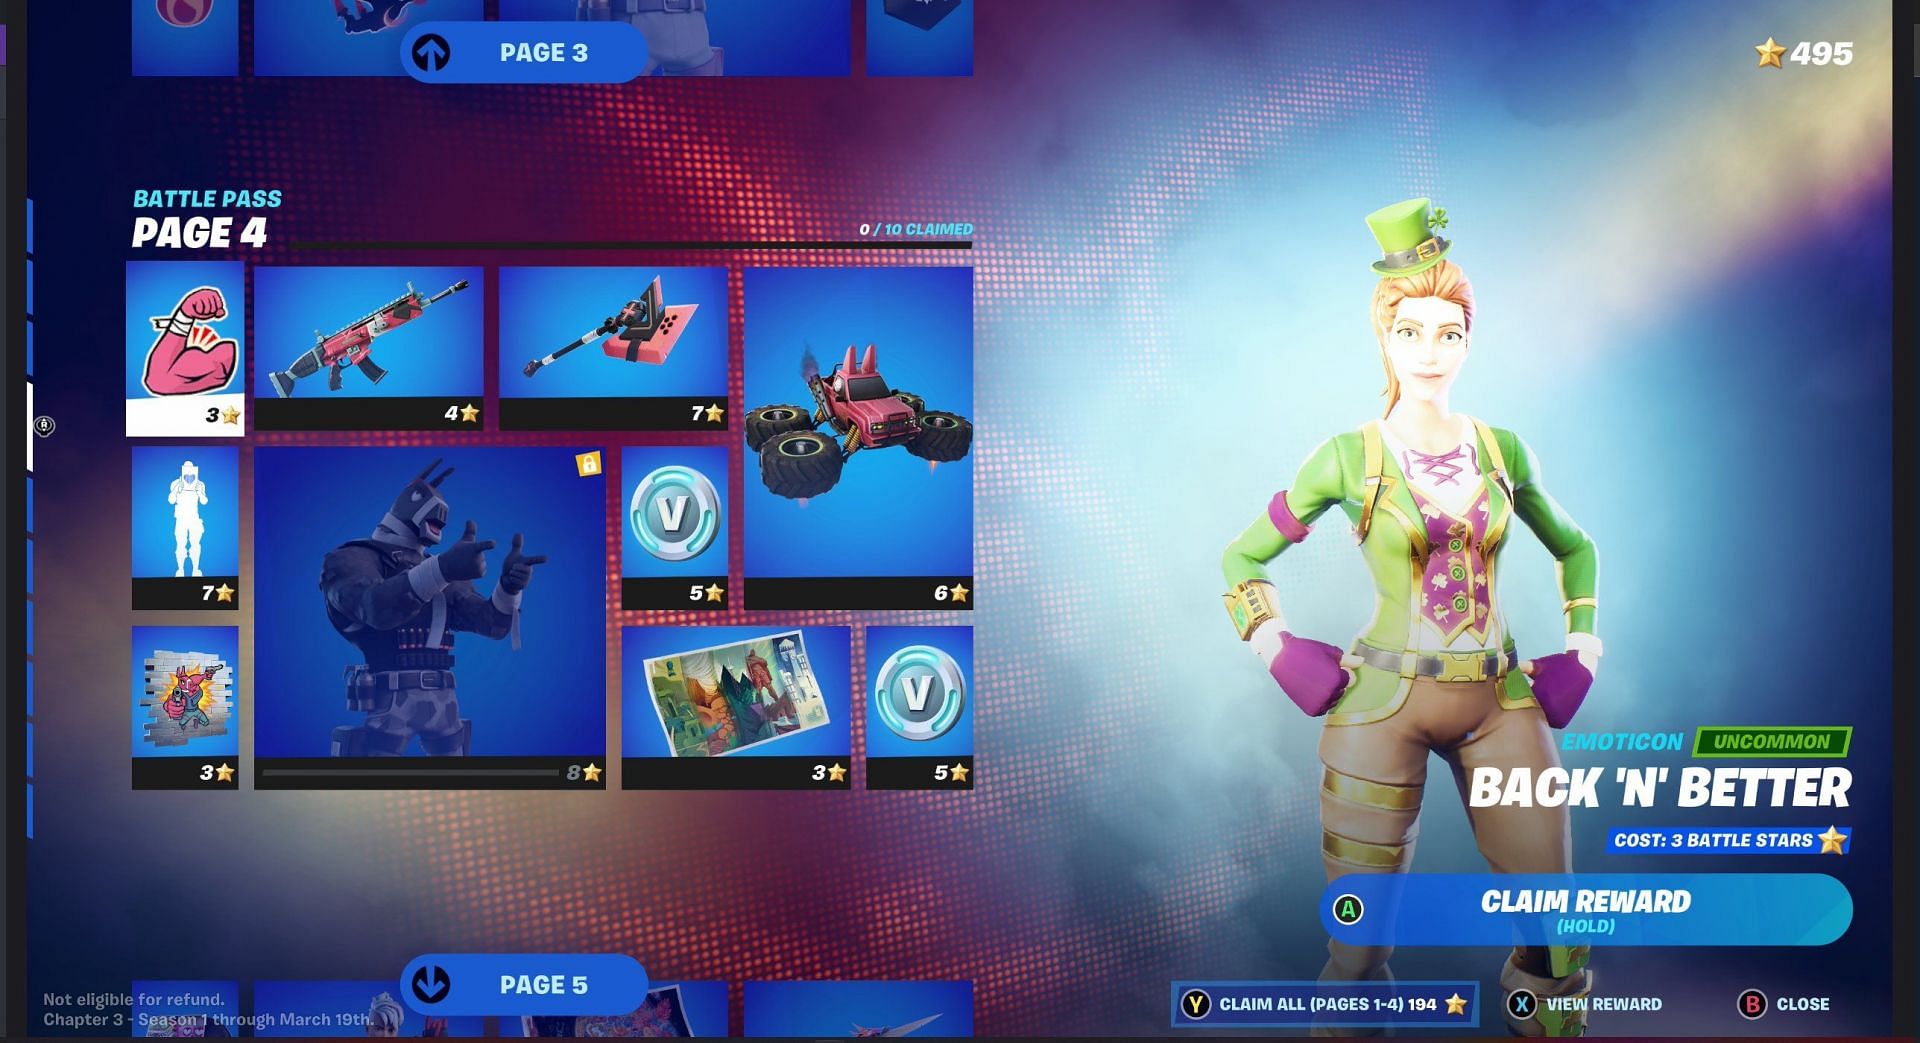 Page 4 of the Battle Pass (Image via Fortnite)